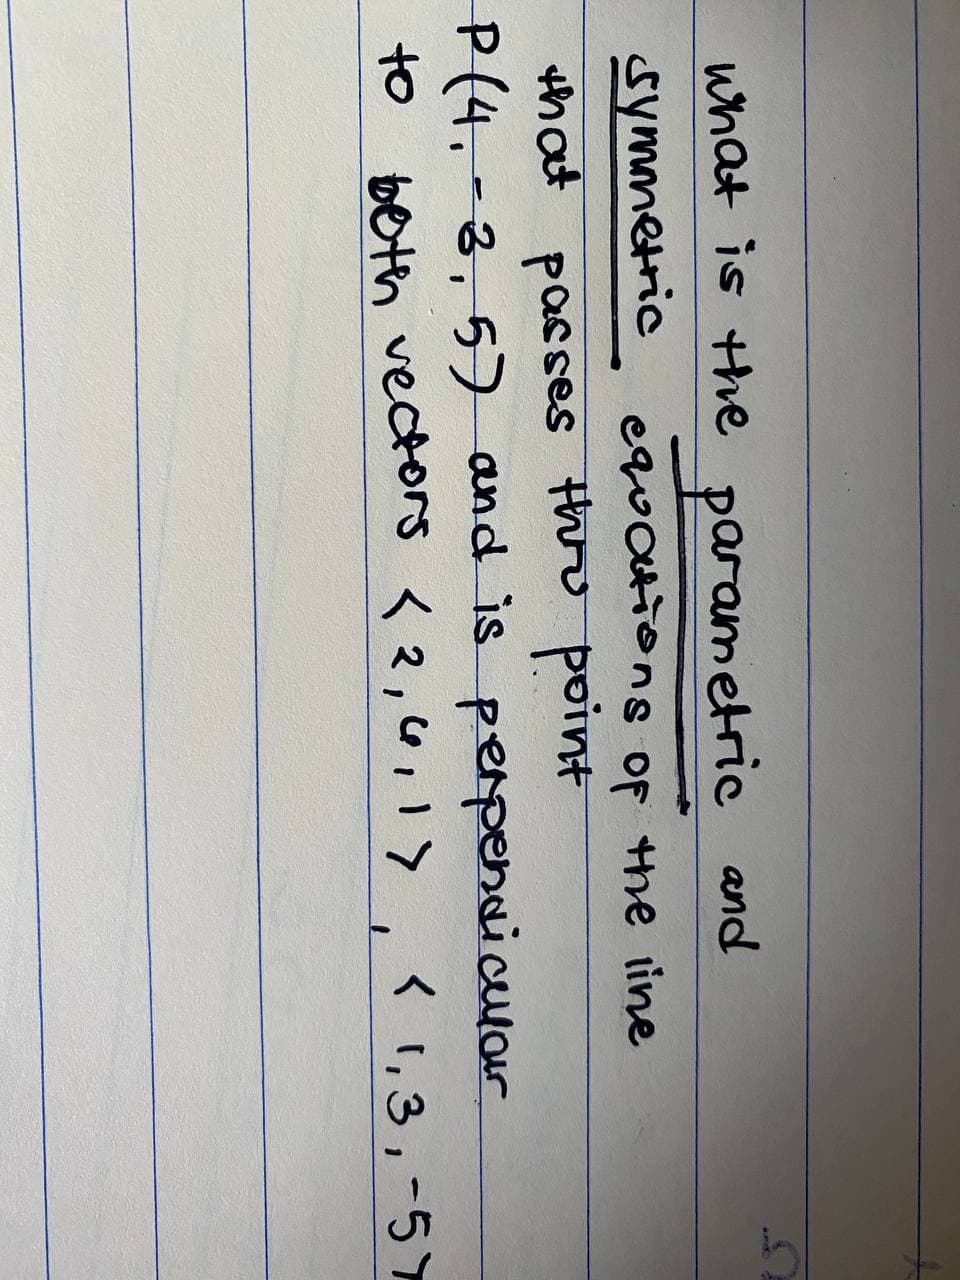 what is the parametric and
symmetric
that passes tho point
P (4.-3, 57 and is
beth vectors <2,4,1>, < 1,3,-57
eqvOtions oF the line
perpensiculour
to
